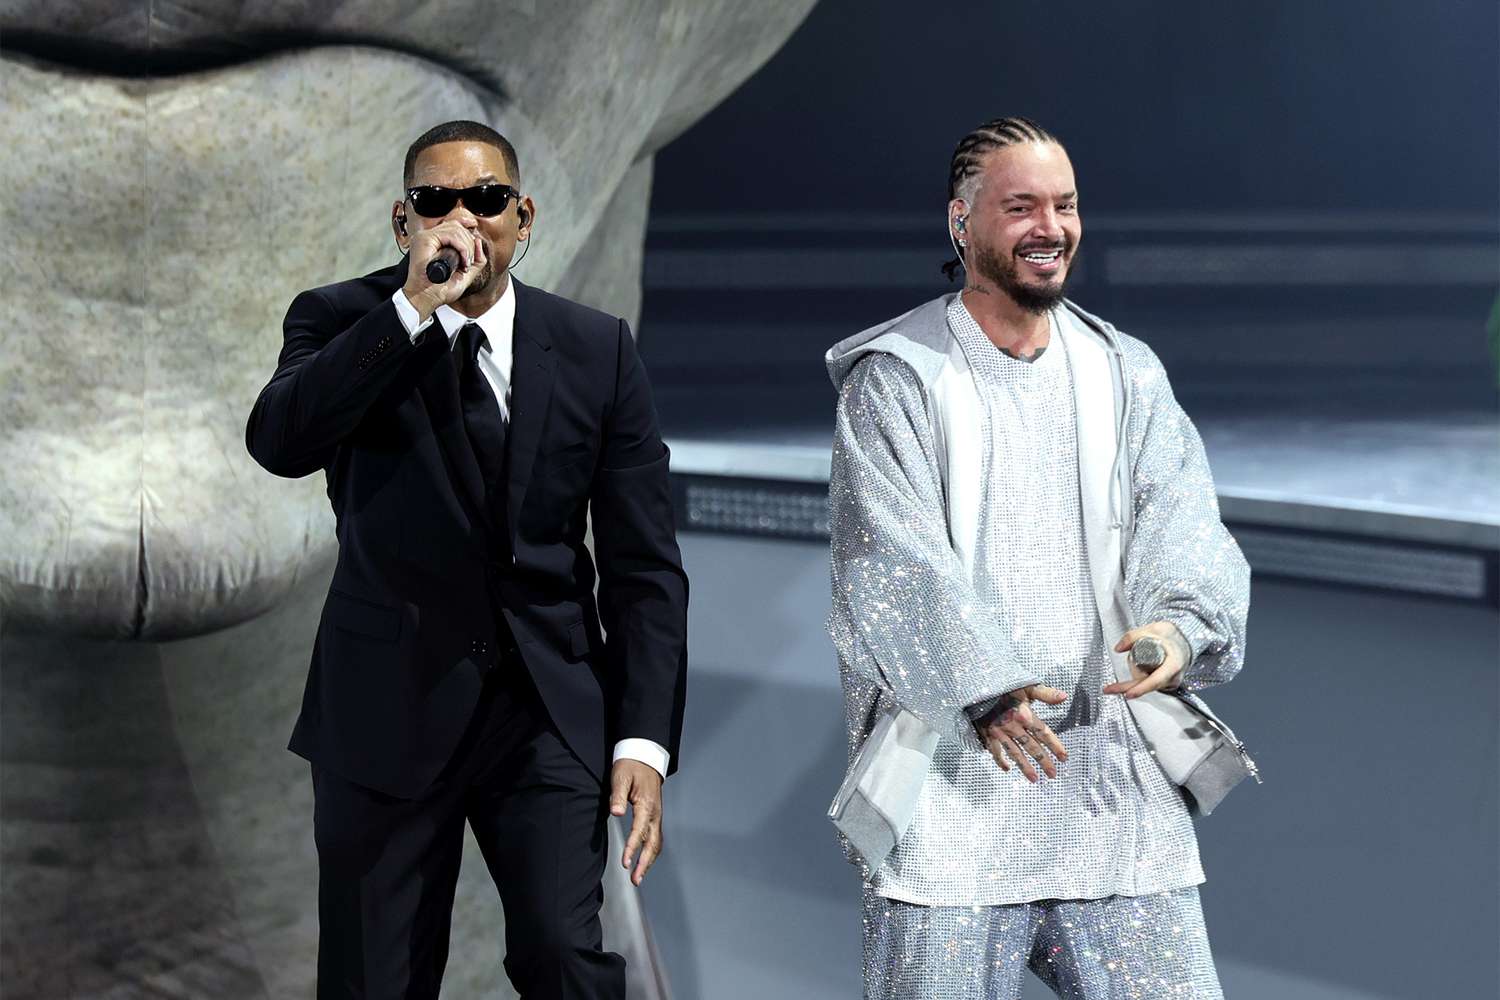 Will Smith Surprises Fans at Coachella, Joining J. Balvin Onstage For ‘Men in Black’ Performance